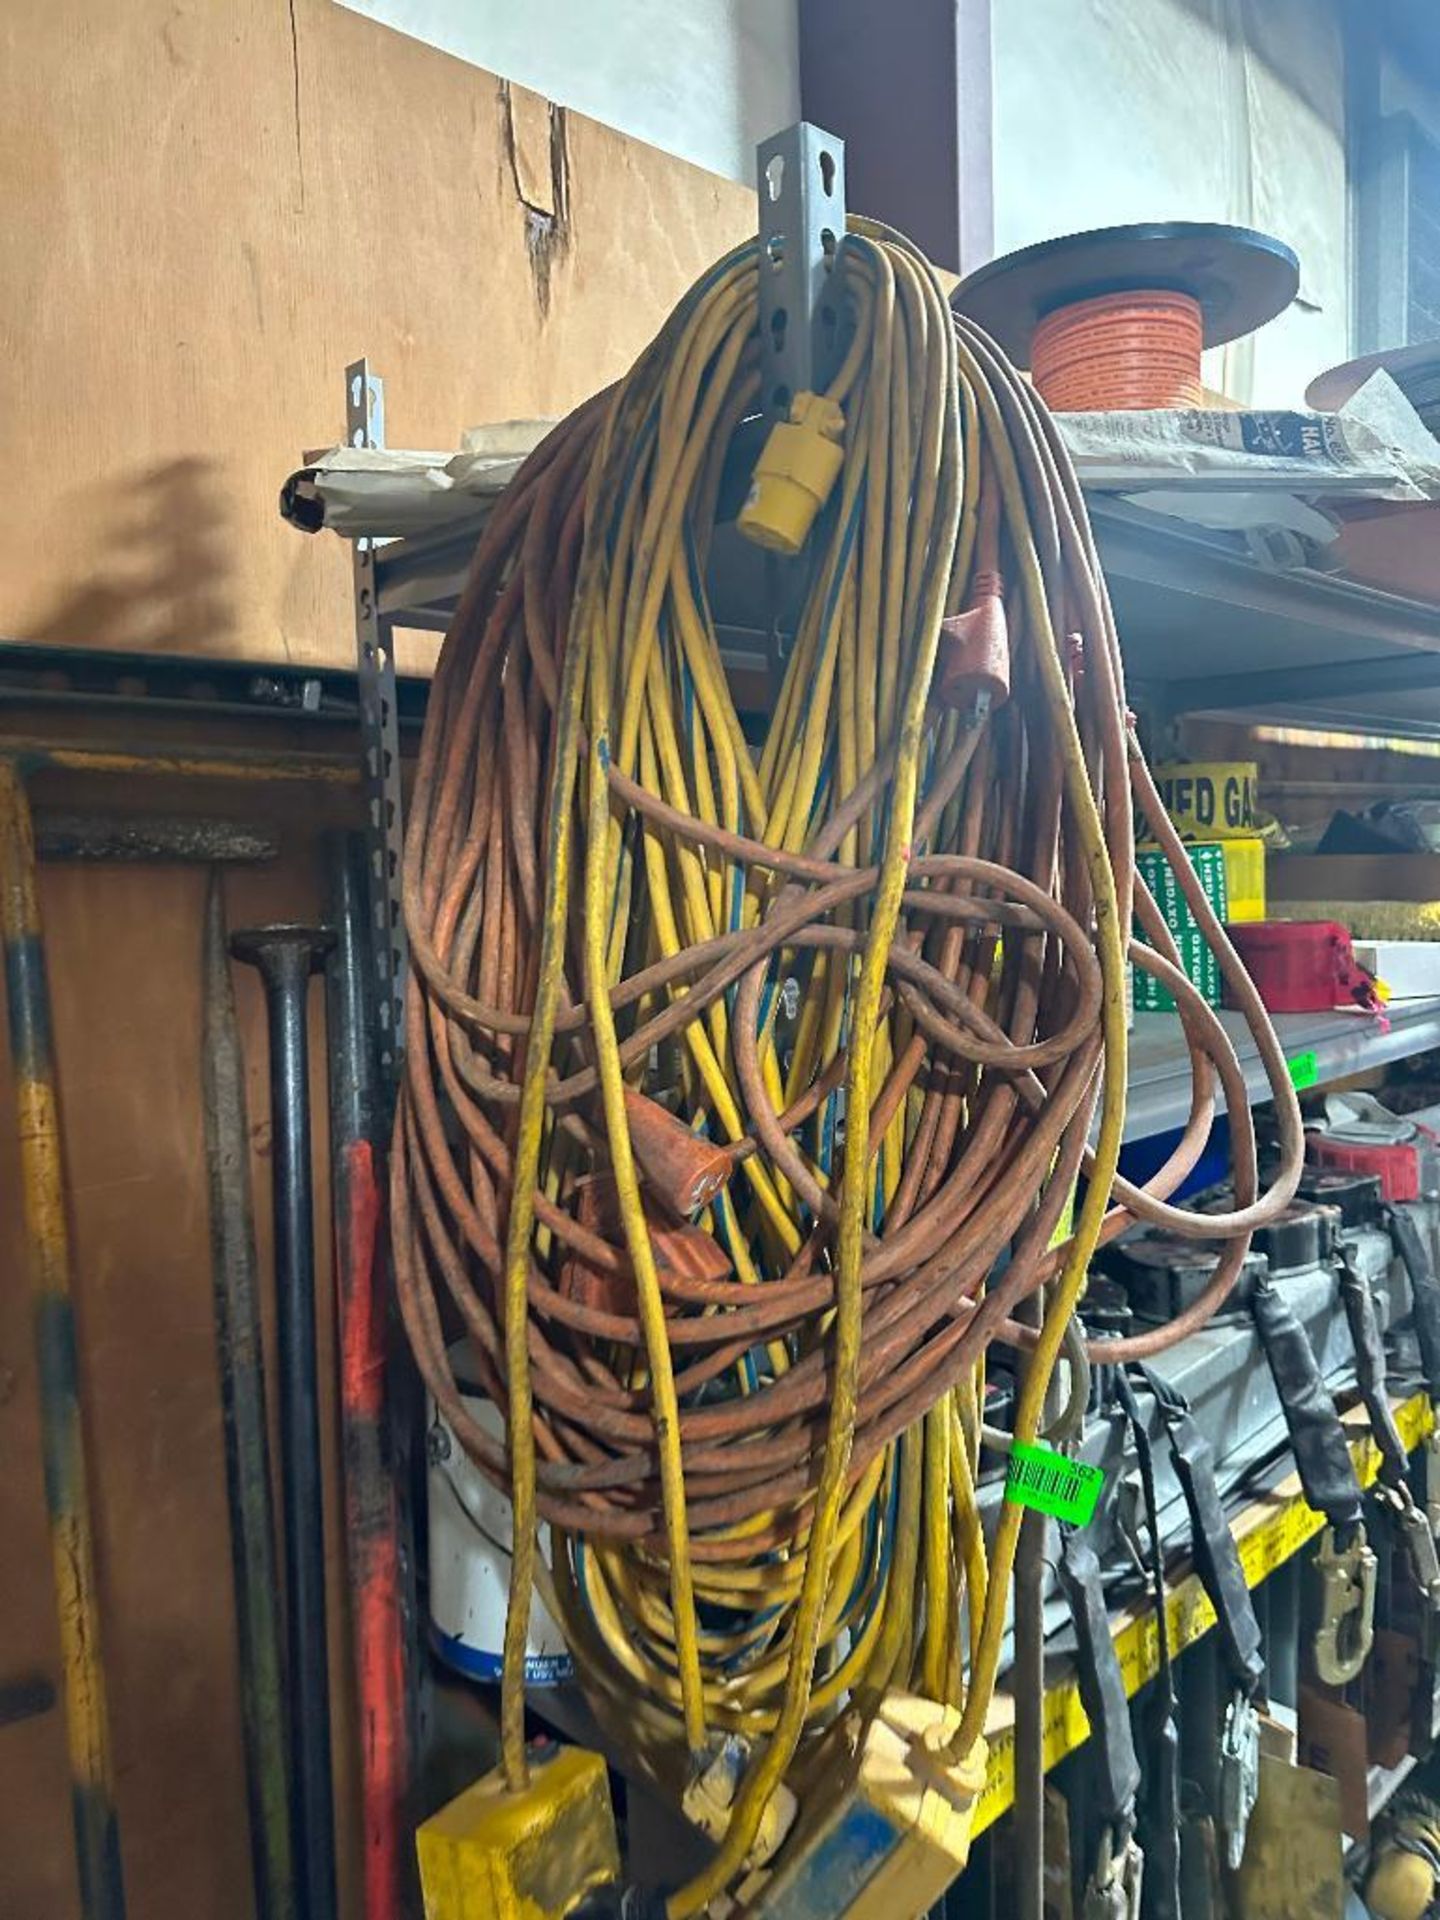 ASSORTED GROUP OF ELECTRICAL CABLES AND EXTENSION CORDS - Image 2 of 4